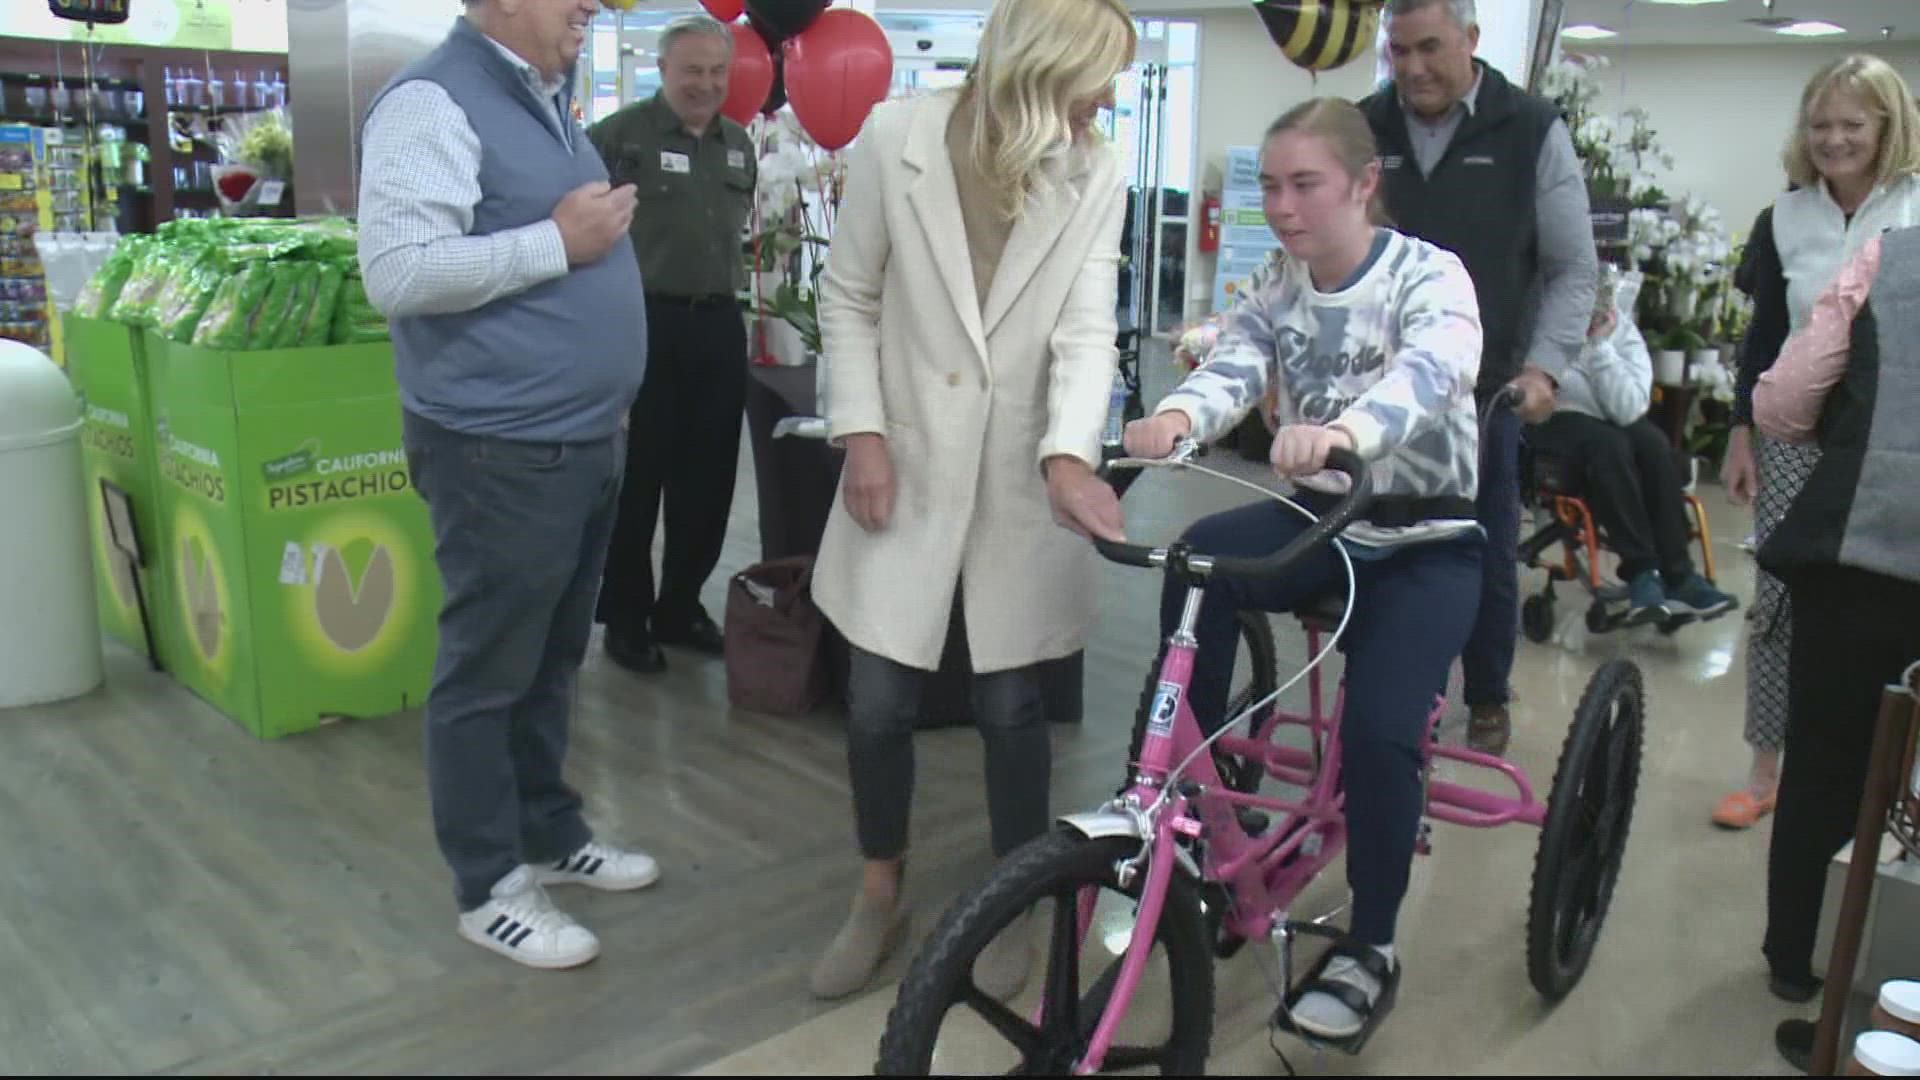 The girl's mom says she's excited her daughter can ride a bike like everybody else.